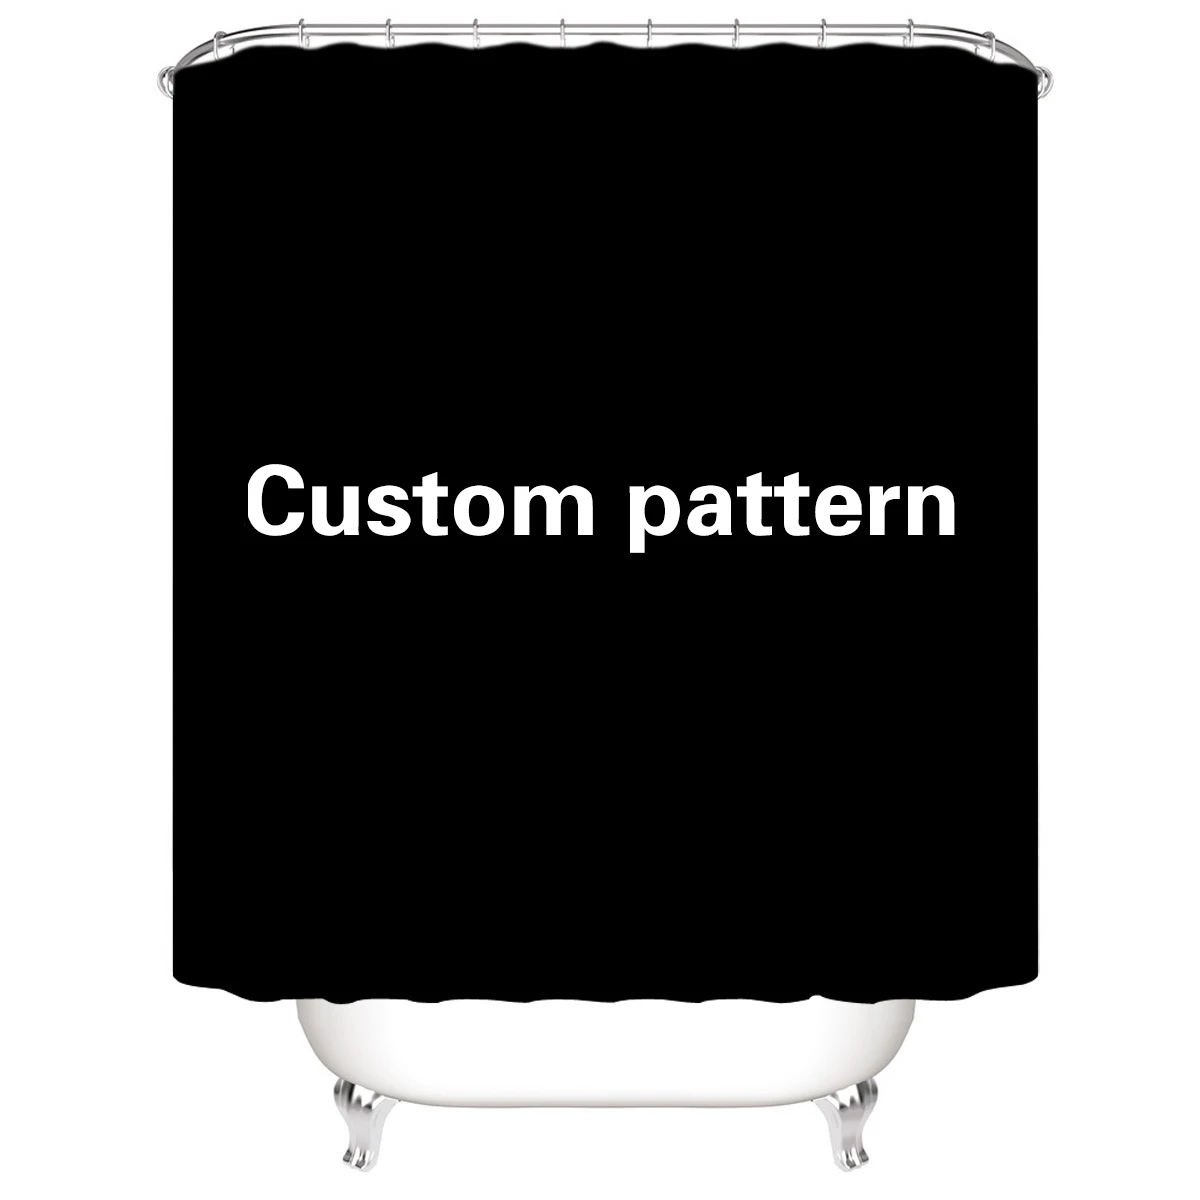 
2020 hot sale four-piece 180x180cm custom pattern thick polyester waterproof shower curtain 